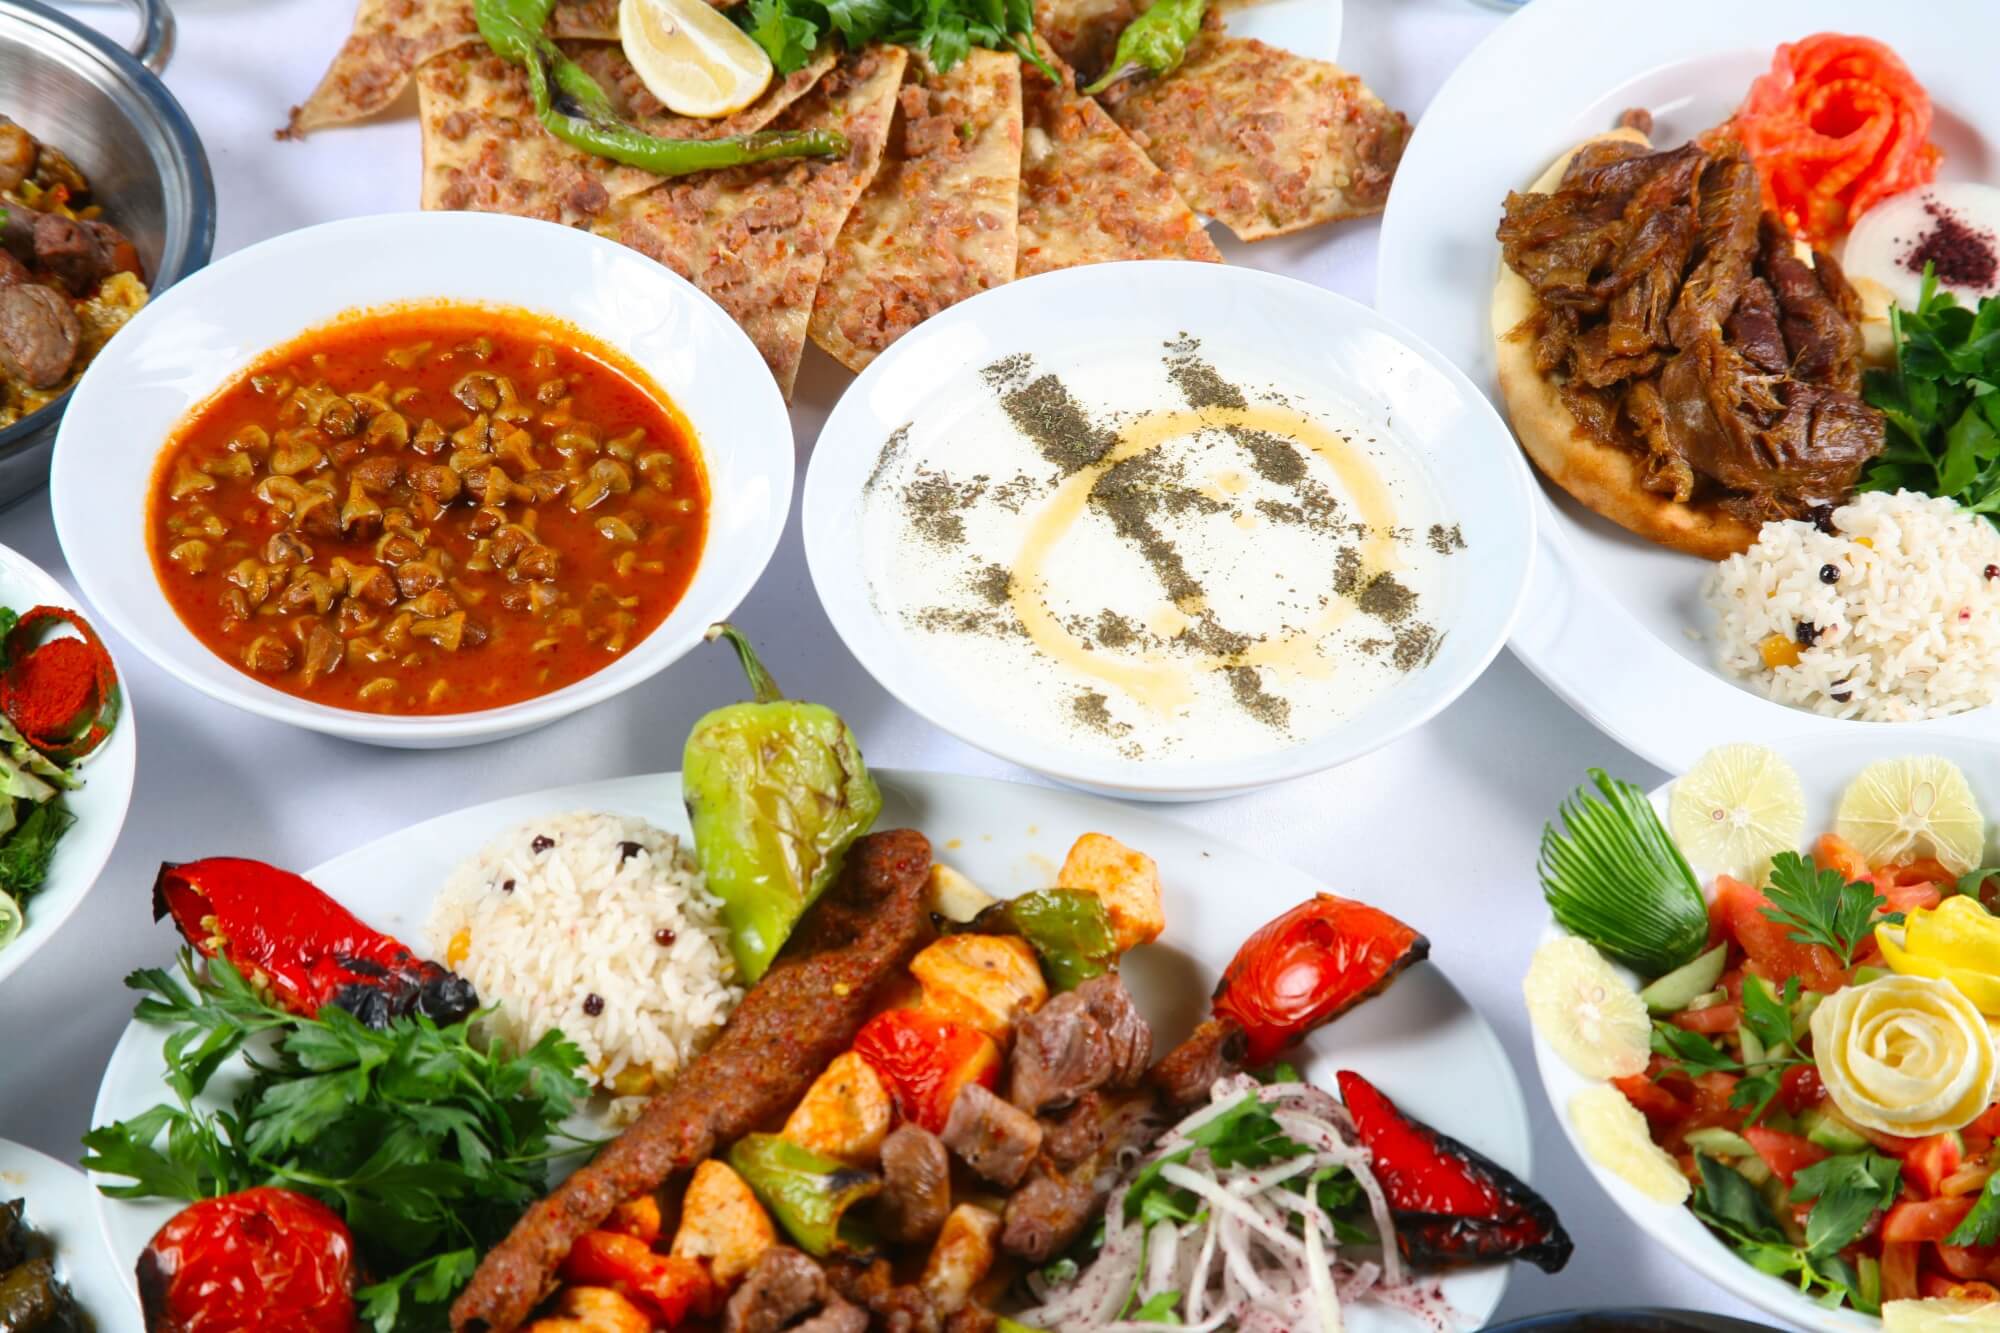 Give the Turkish mezes a try, you won't regret it